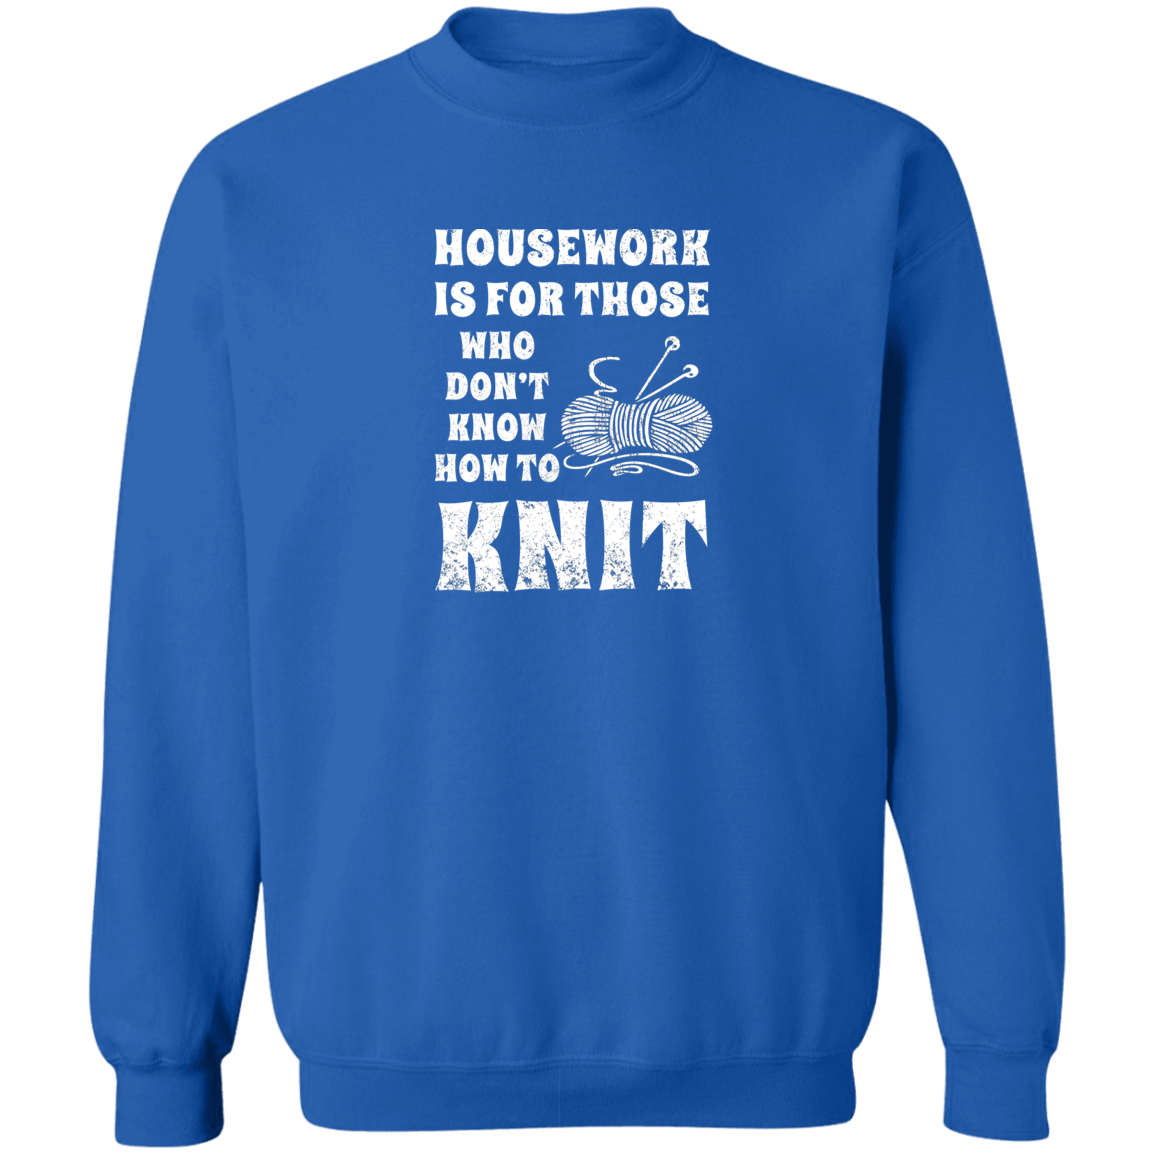 Housework is for Those Who Don't Know How to Knit Sweatshirt